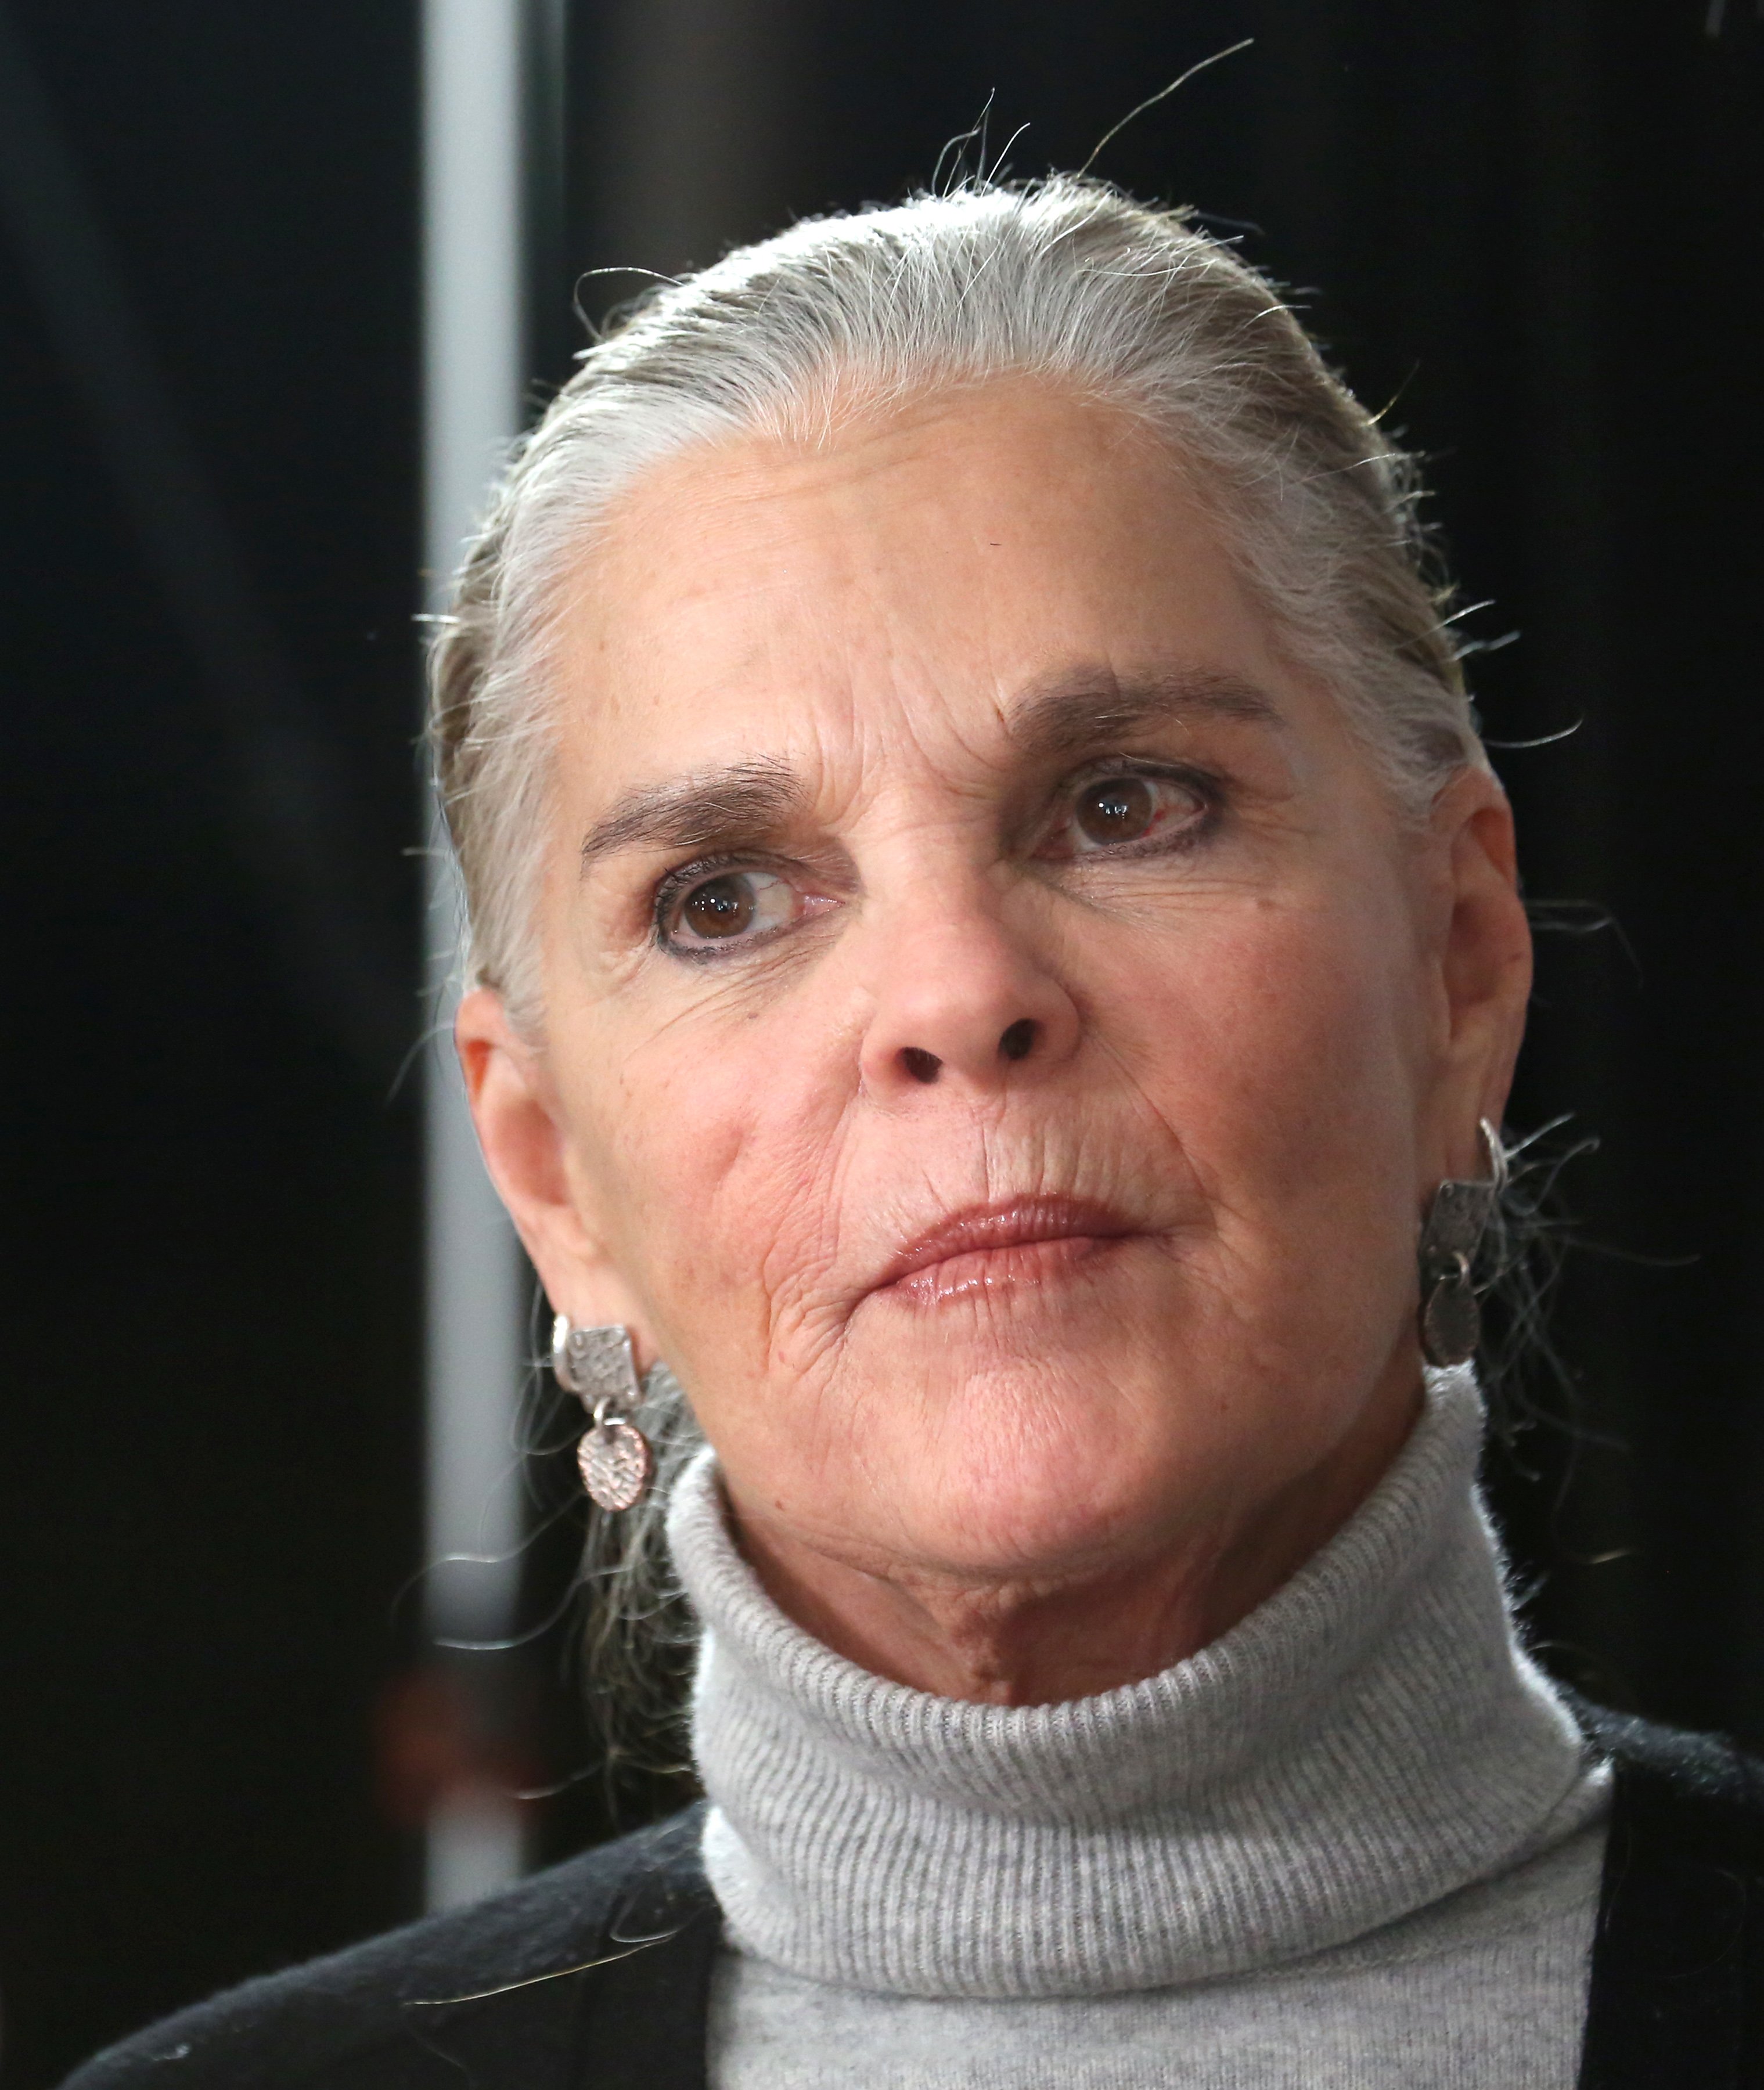 Ali MacGraw attending a photo call for touring production of "Love Letters" at The Shelter Studios Penthouse on February 24, 2015 in New York City. | Source: Getty Images